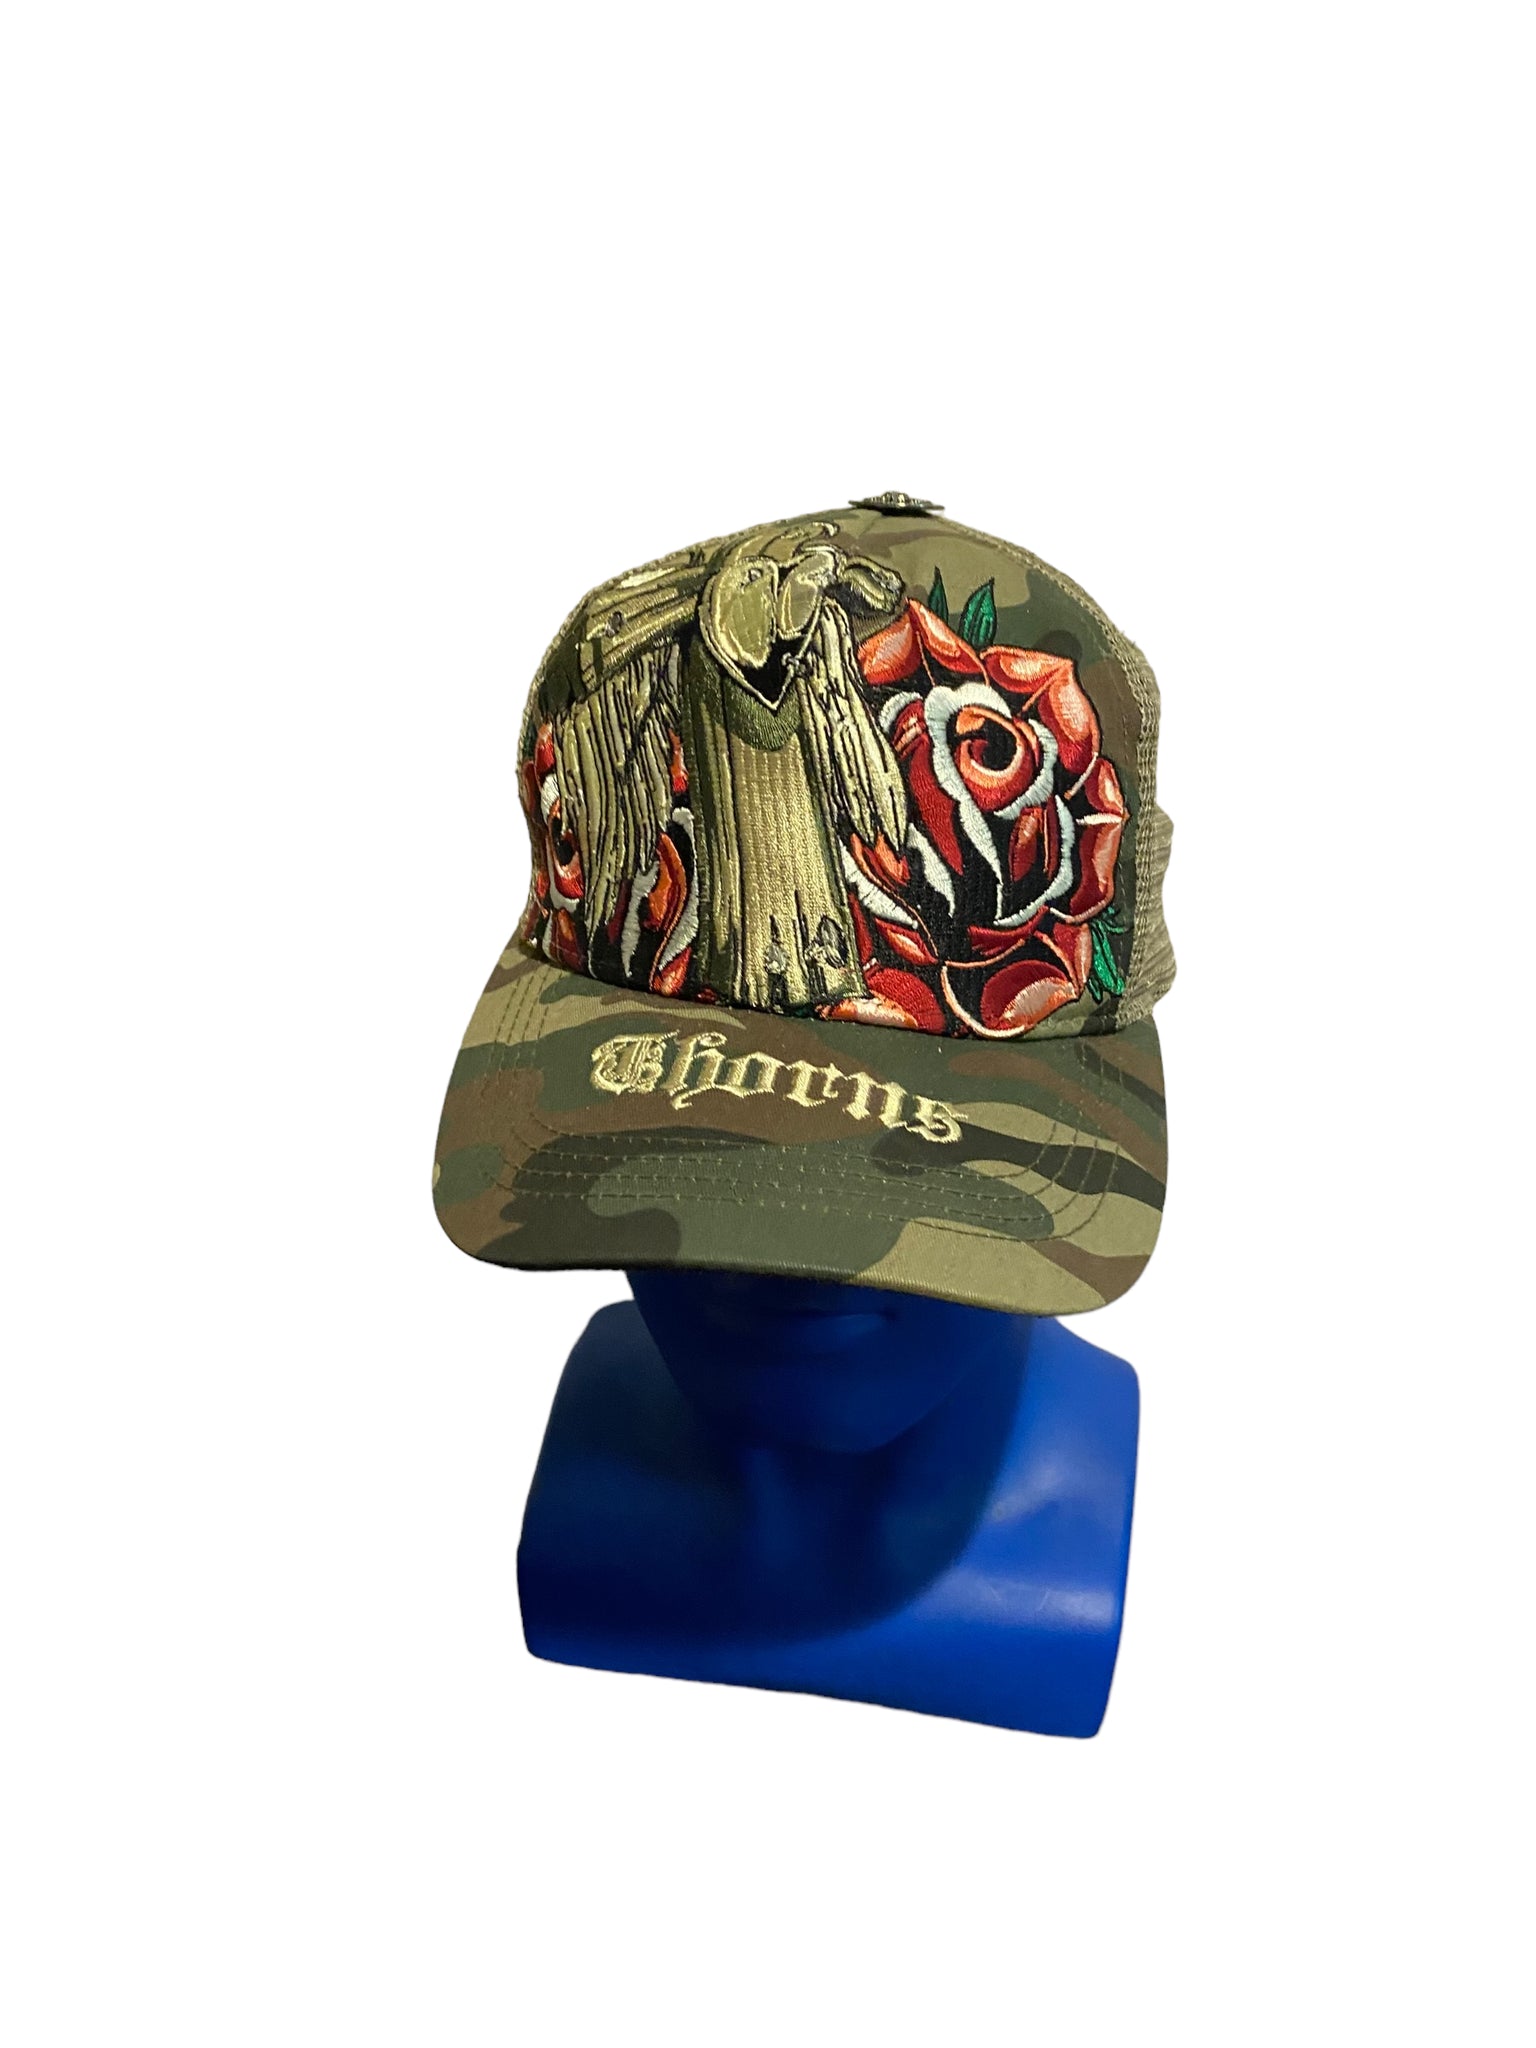 thorns brand Embroidered Tattoo Style Logos Camo trucker hat snapback